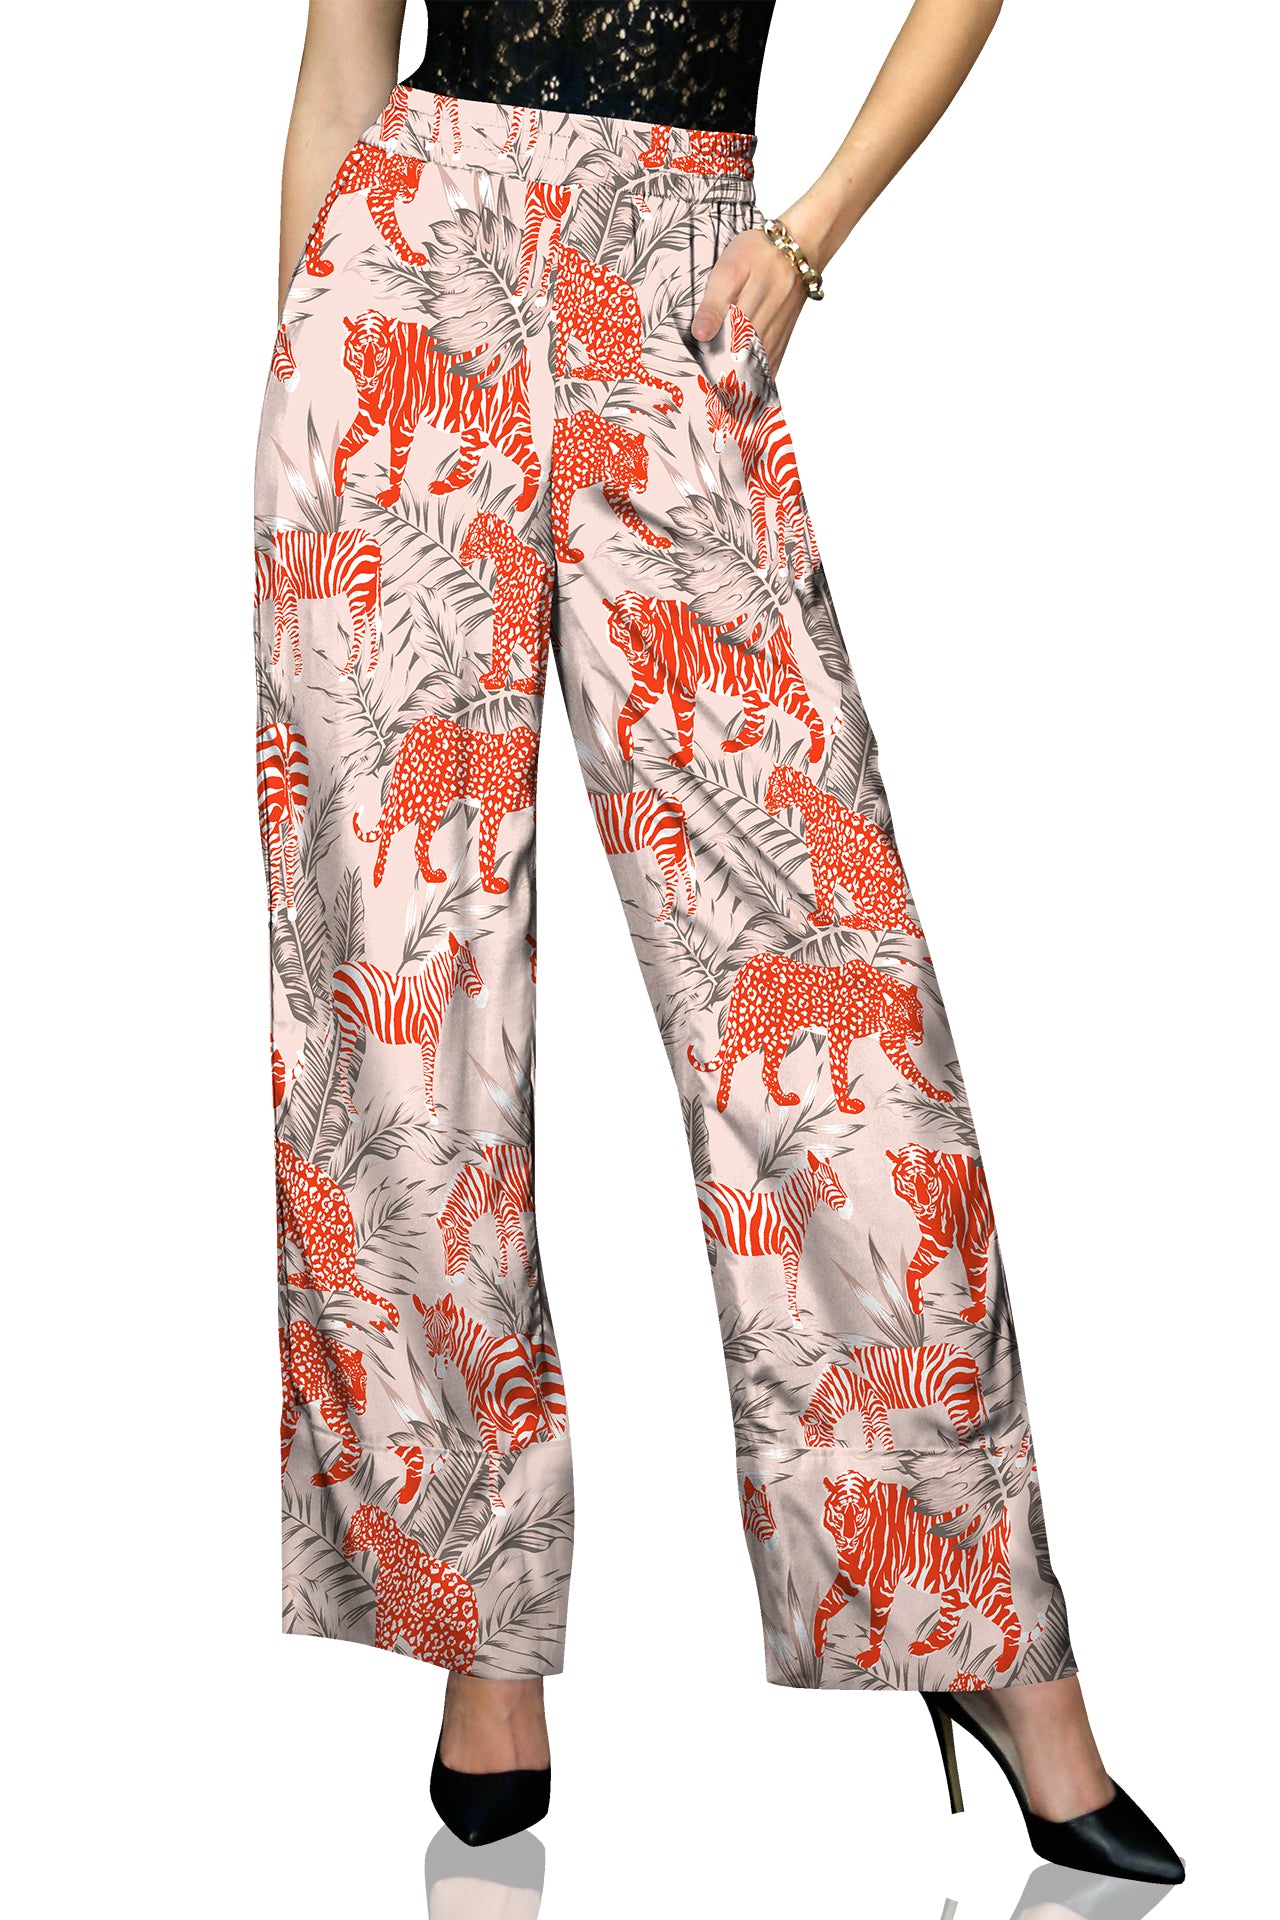 As seen on Kyle Zebra and Tiger Silk Pants in Orange